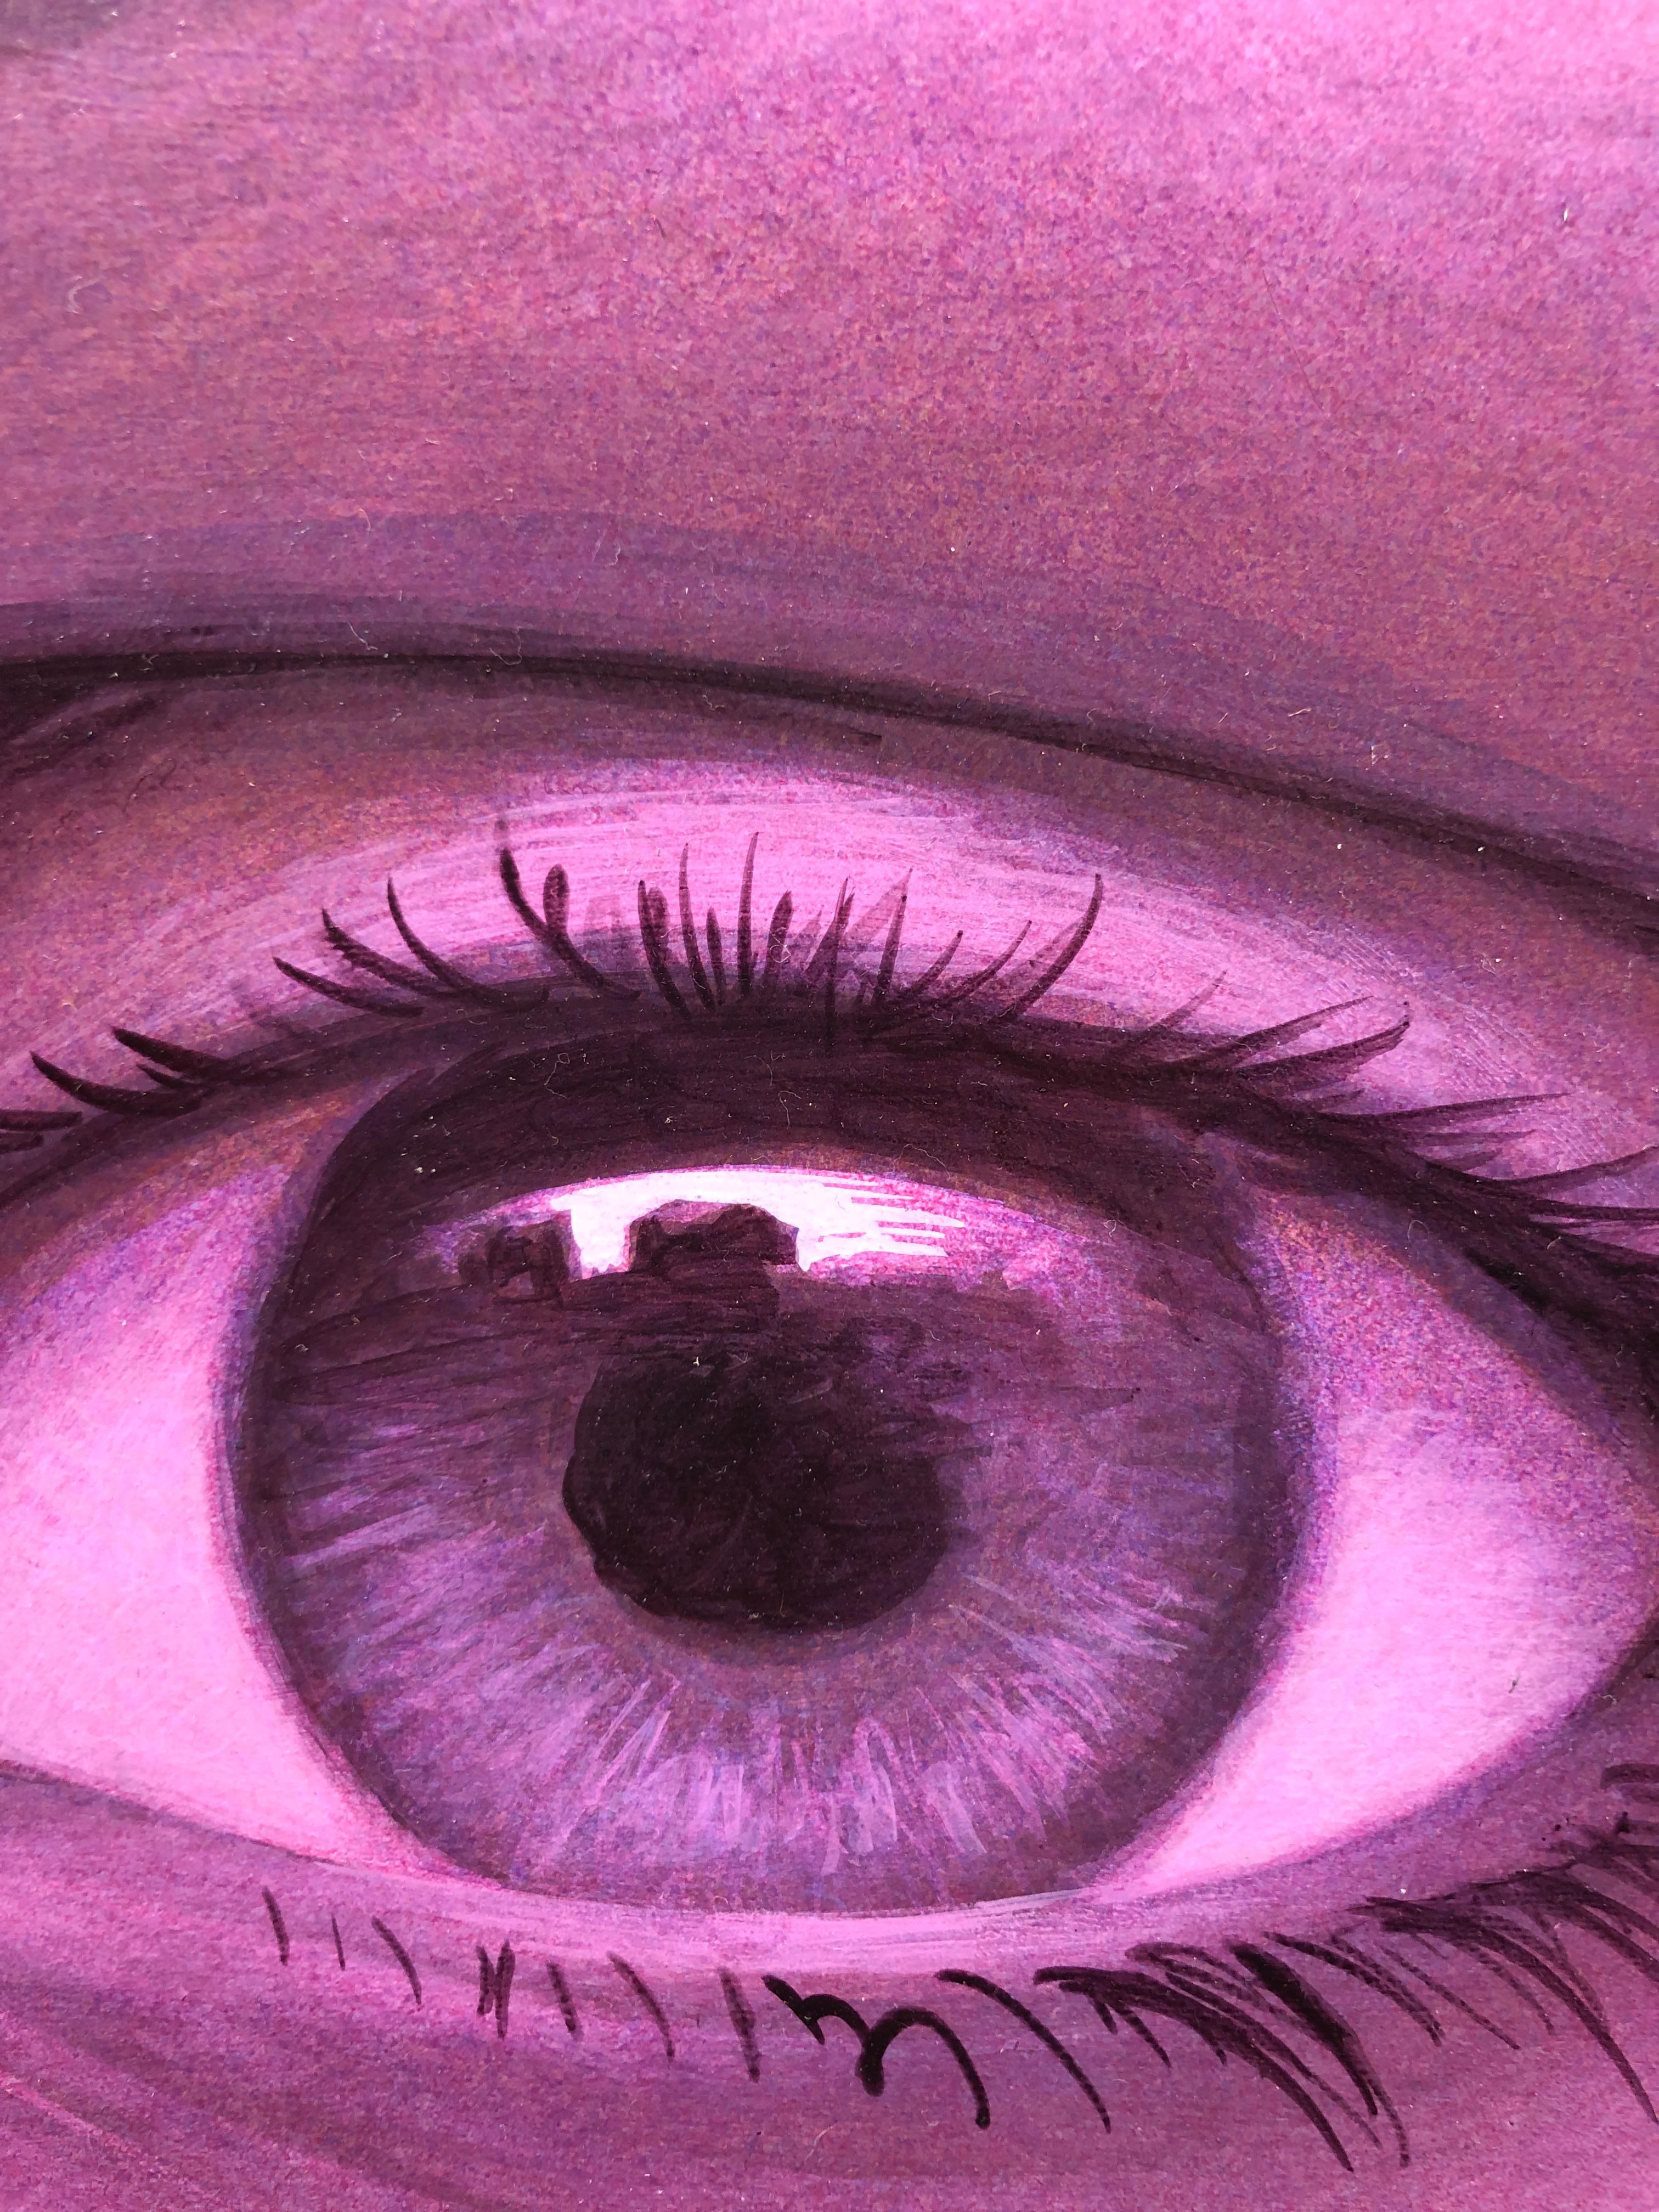 The Eye of Providence, Violet Hued All-Seeing Human Eye, Acrylic on Panel - Surrealist Painting by Oliver Hazard Benson